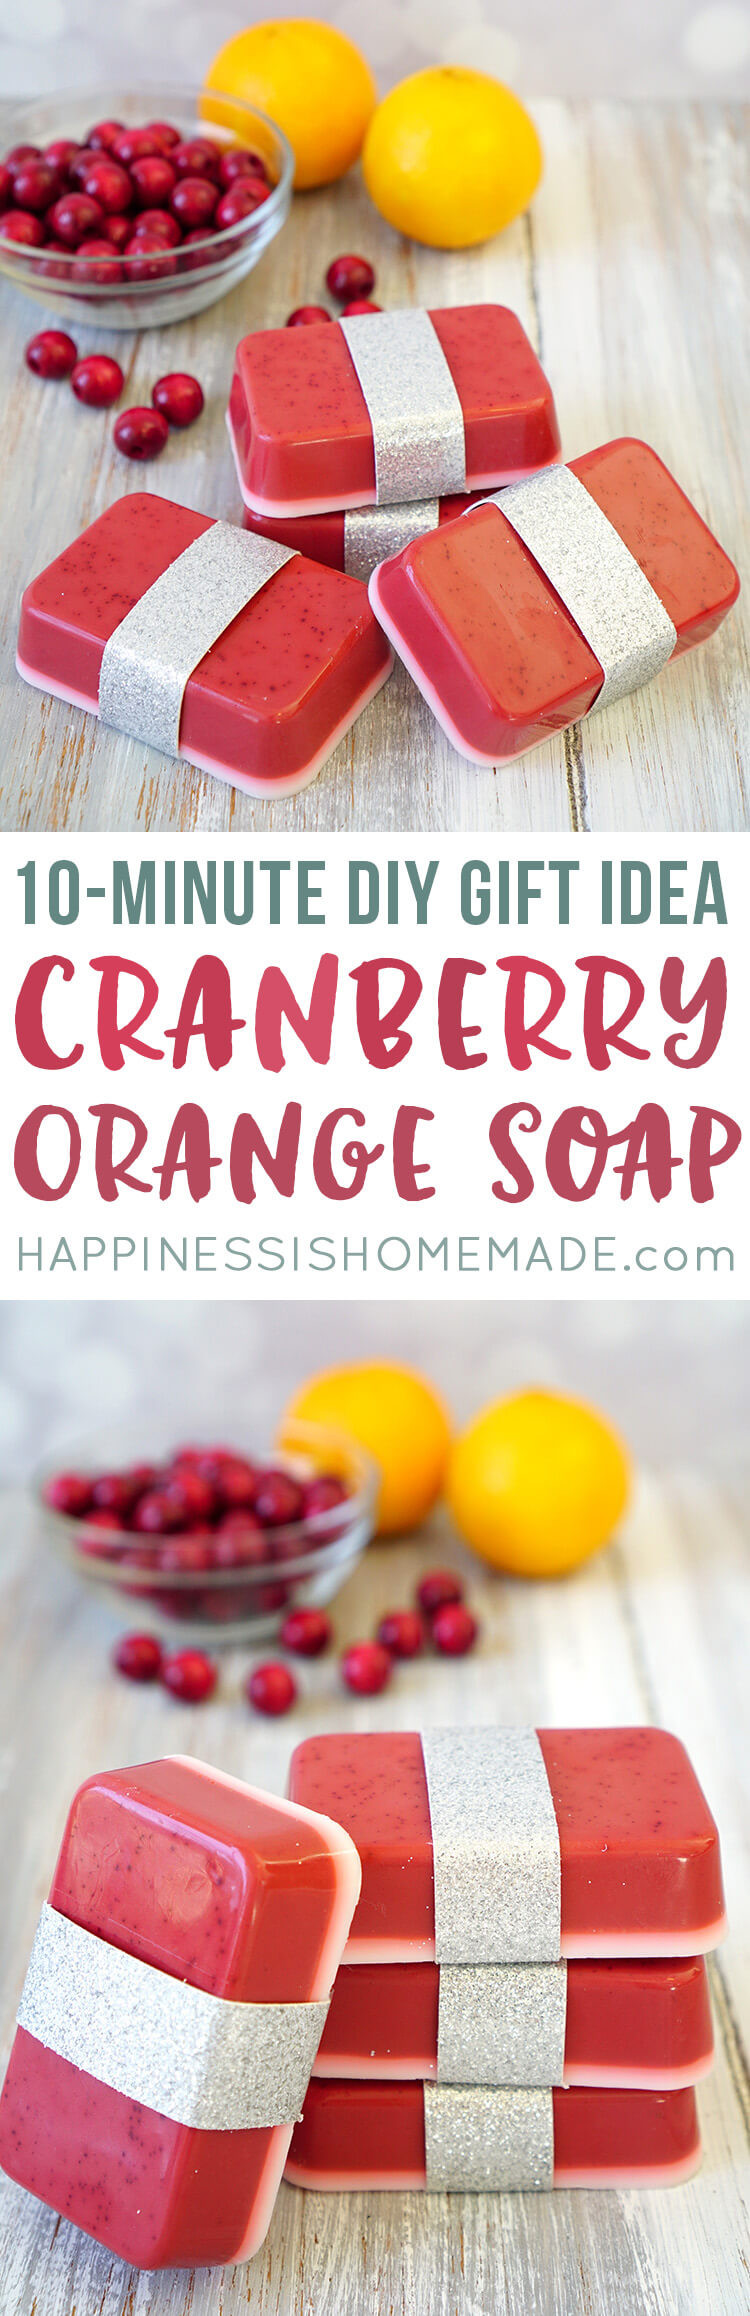 DIY Holiday Gifts
 10 Minute DIY Cranberry Orange Soap Happiness is Homemade